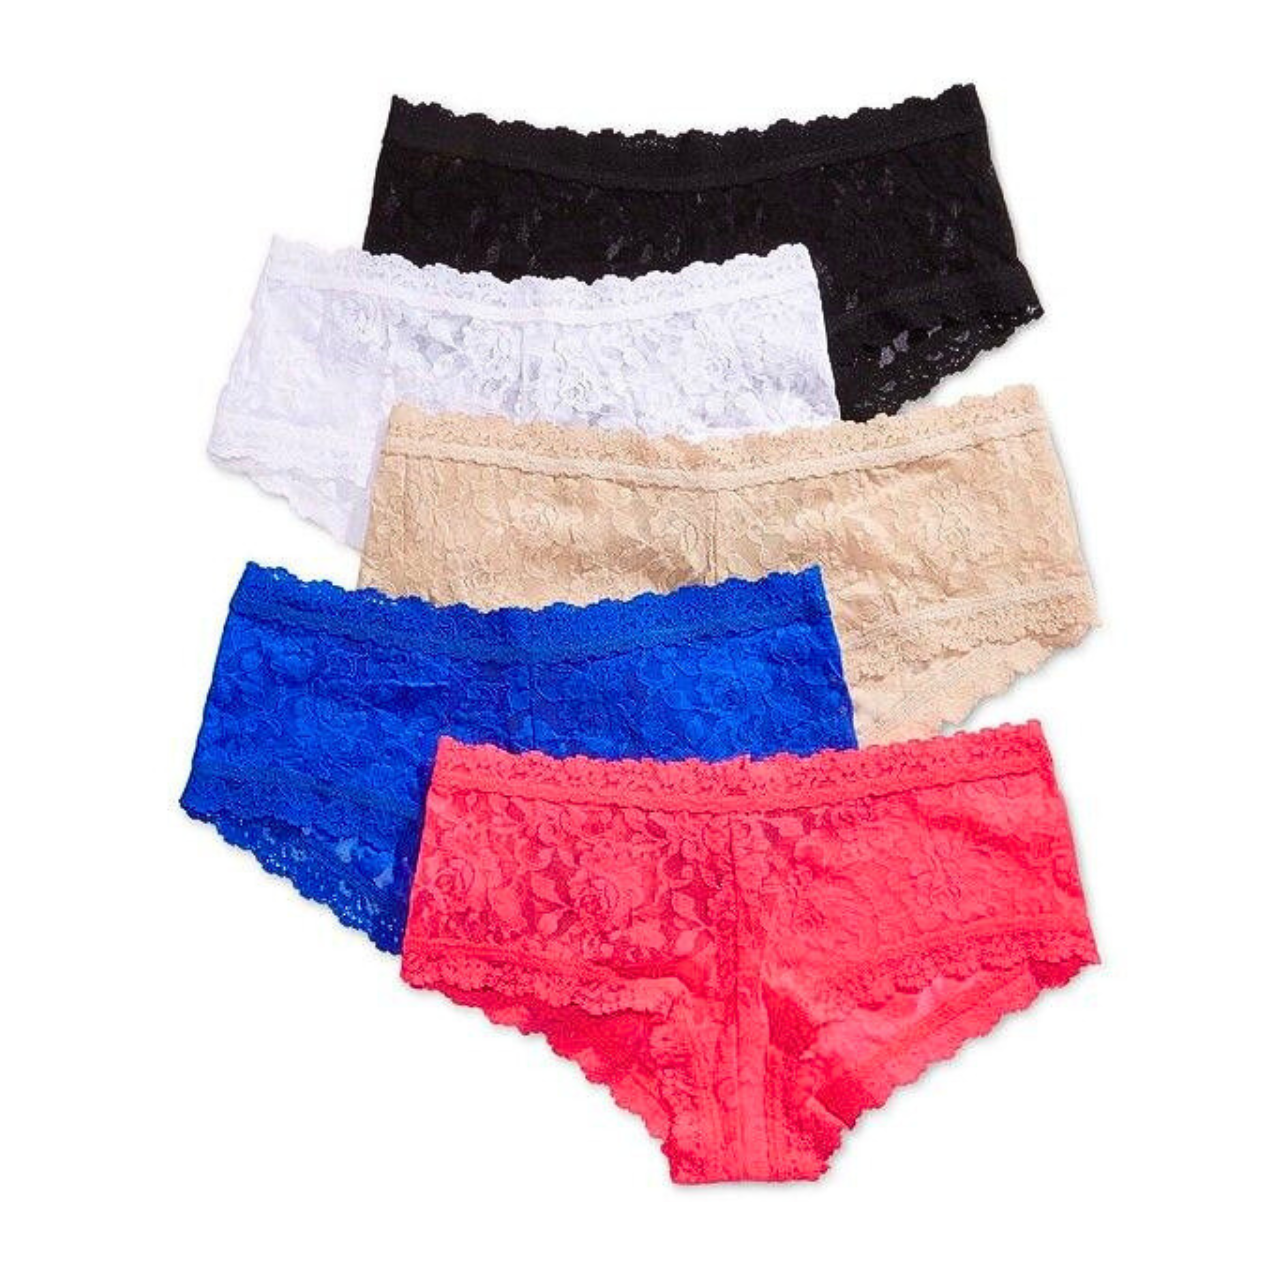 Hanky Panky, Made in the U.S.A. Since 1977 - The New York Times